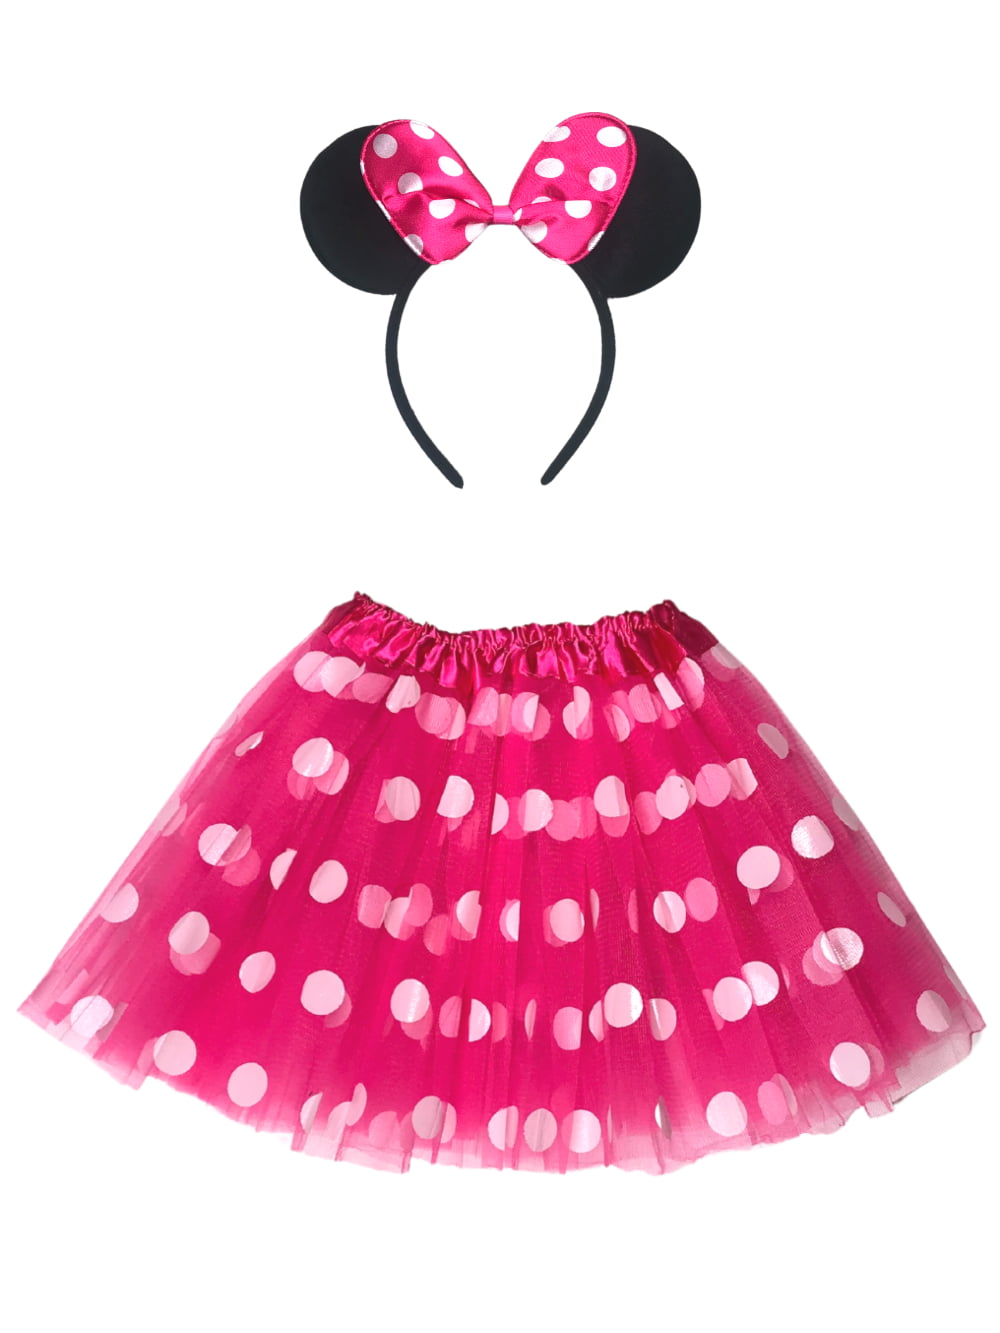 12" length SKIRT AND EAR SET Ladies MINI MOUSE Style Costume Fancy Dress 